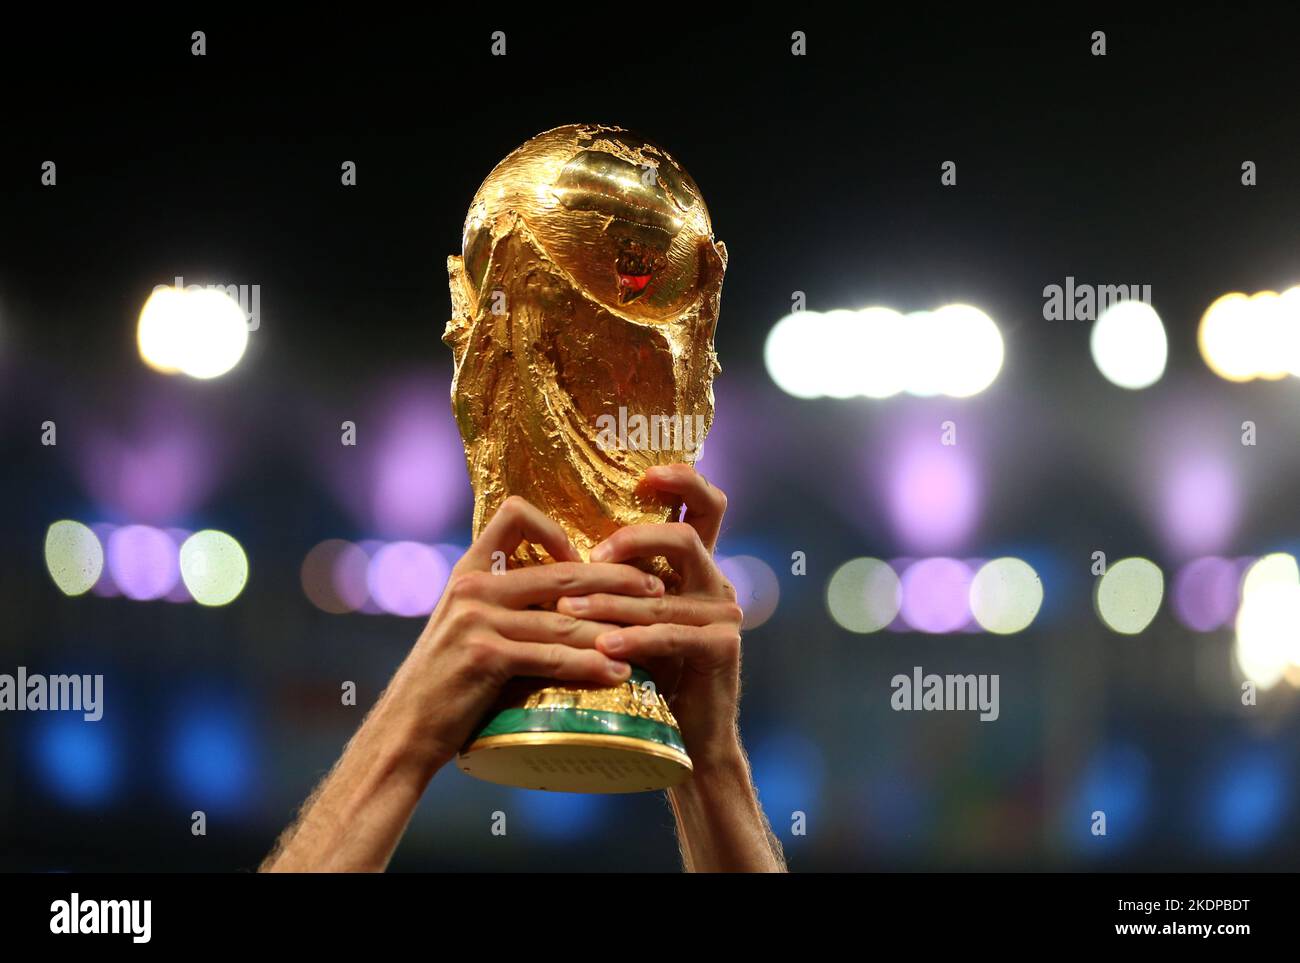 File photo dated 13-07-2014 of A Germany player lifts the FIFA World Cup Trophy. The World Cup starts in Qatar in a little under two weeks’ time and here, the PA news agency takes a look at the tournament in numbers. 5 - Brazil's record number of World Cup wins, one ahead of Italy and Germany. Pele played in three of those for an individual record. Issue date: Tuesday November 8, 2022. Stock Photo